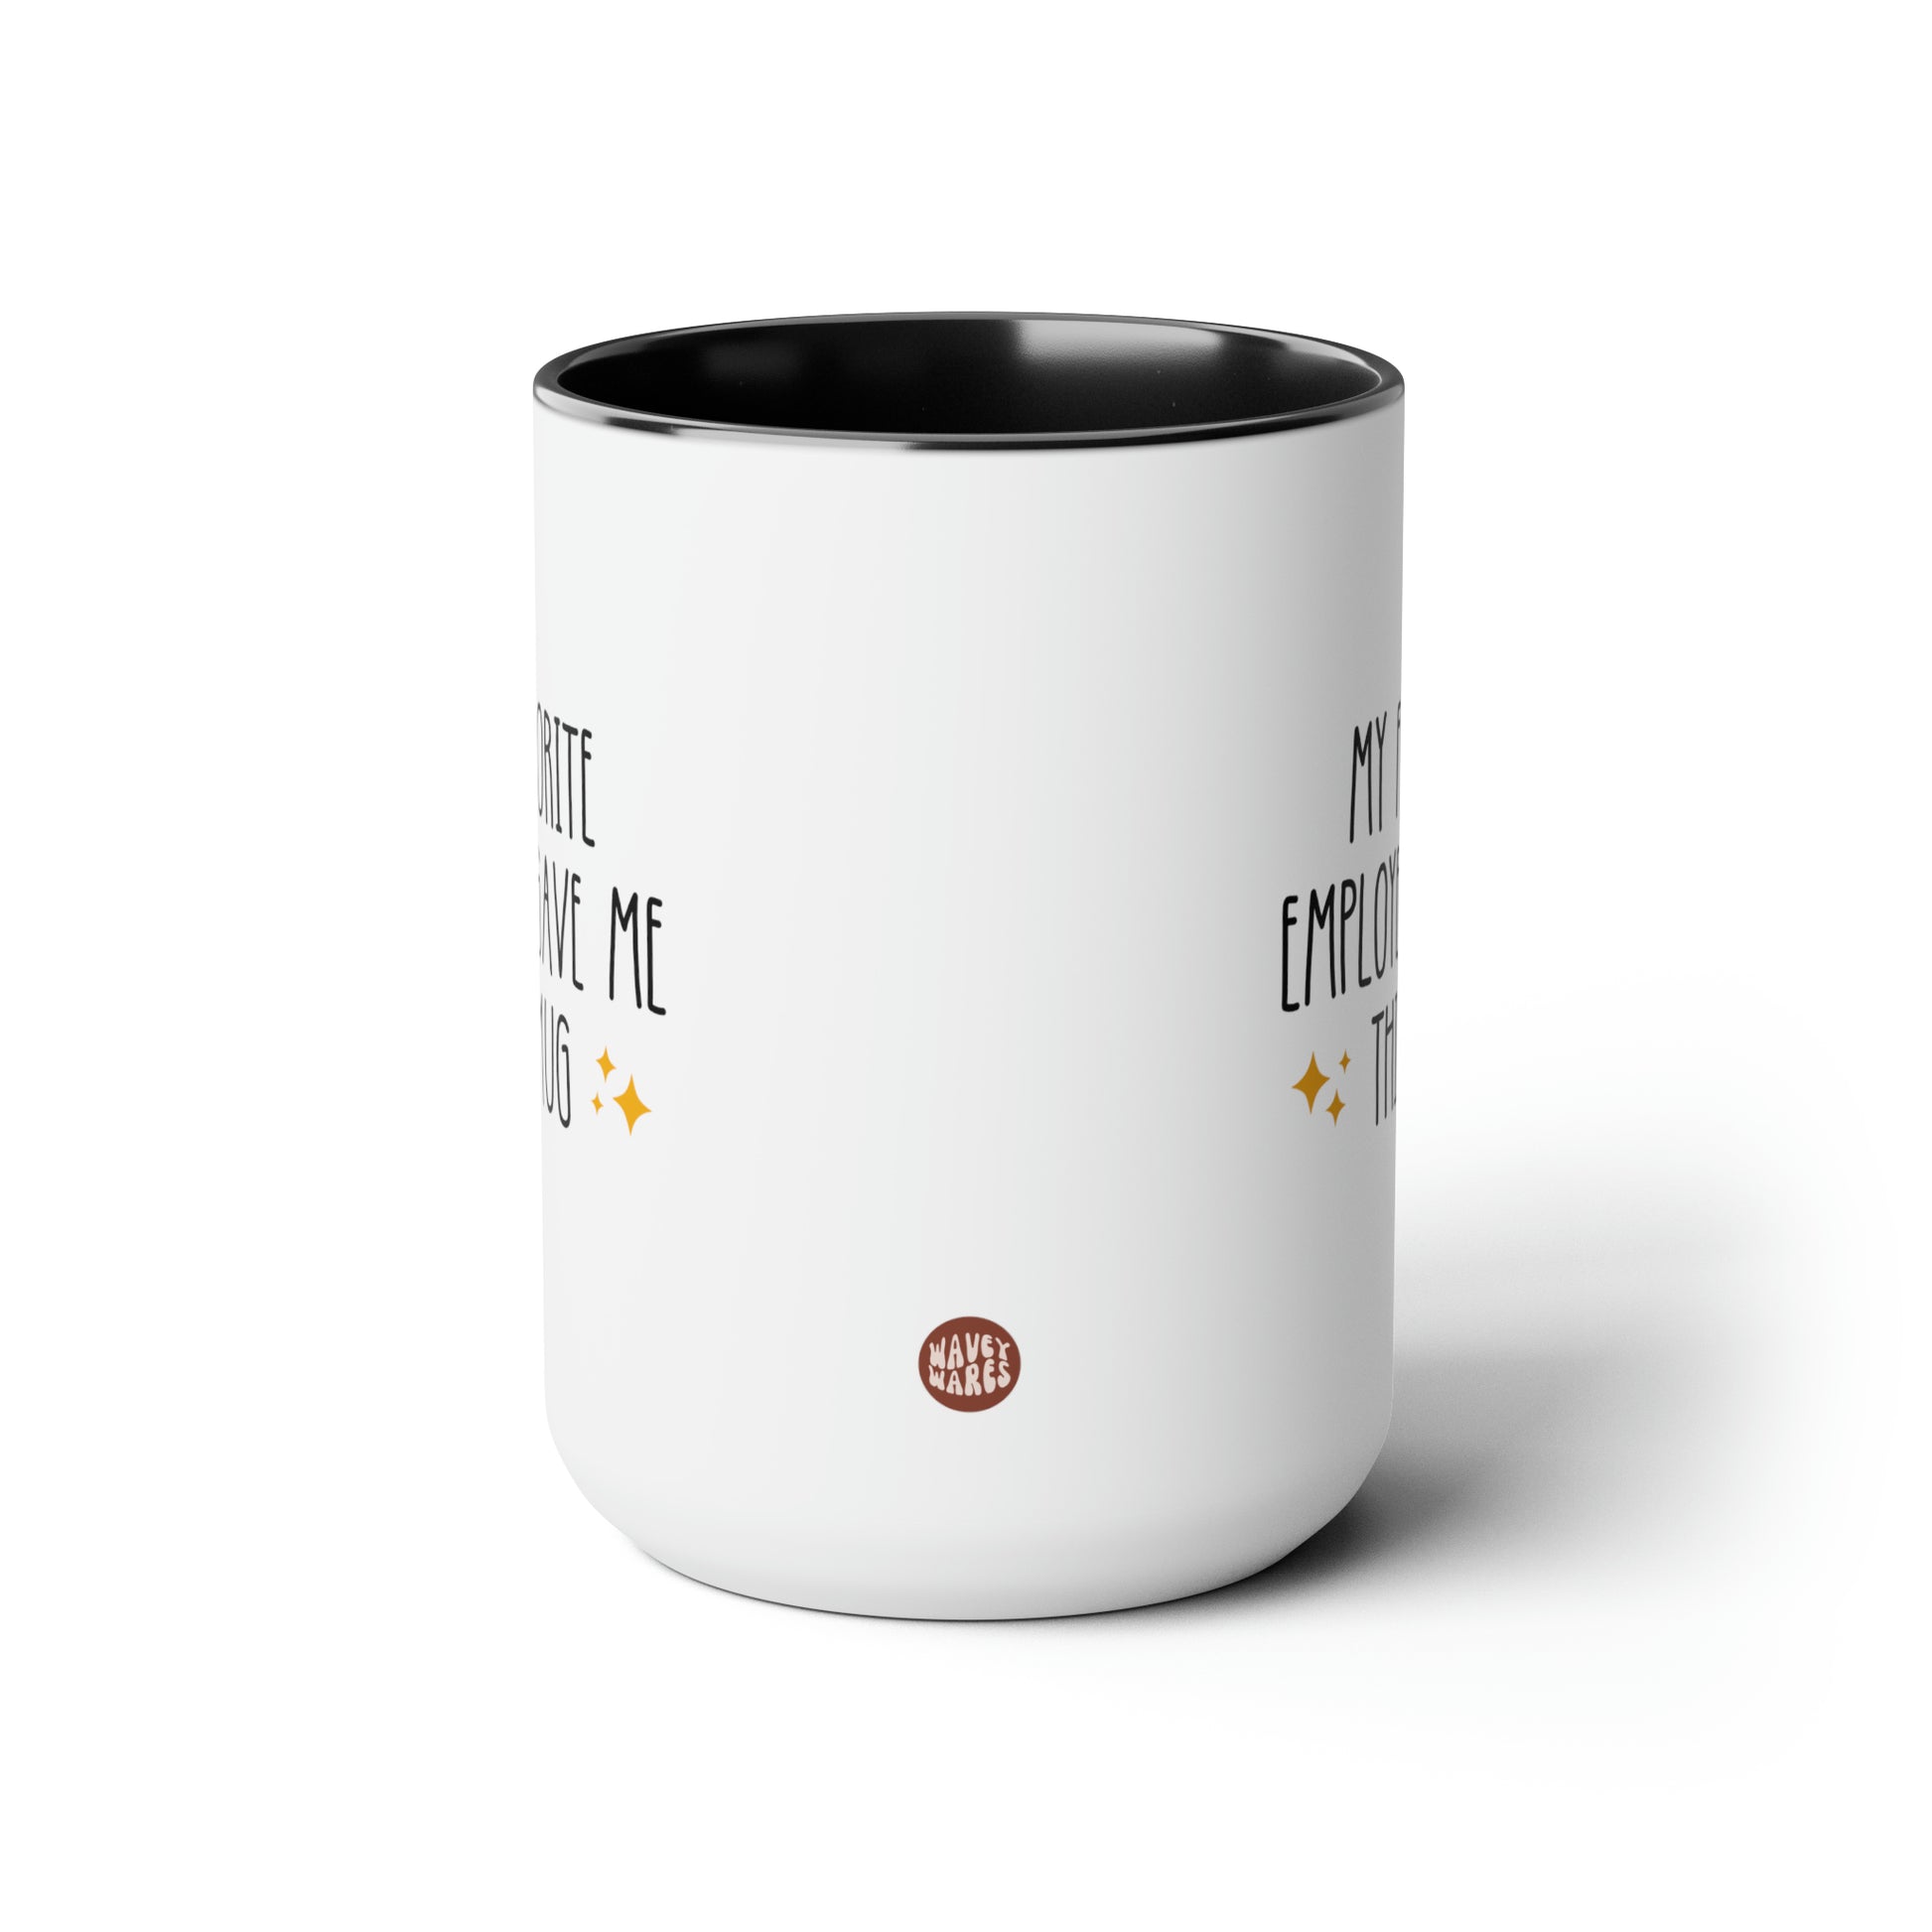 My Favorite Employee Gave Me This Mug 15oz white with black accent funny large coffee mug gift for boss work office cup manager team leader best ever waveywares wavey wares wavywares wavy wares side